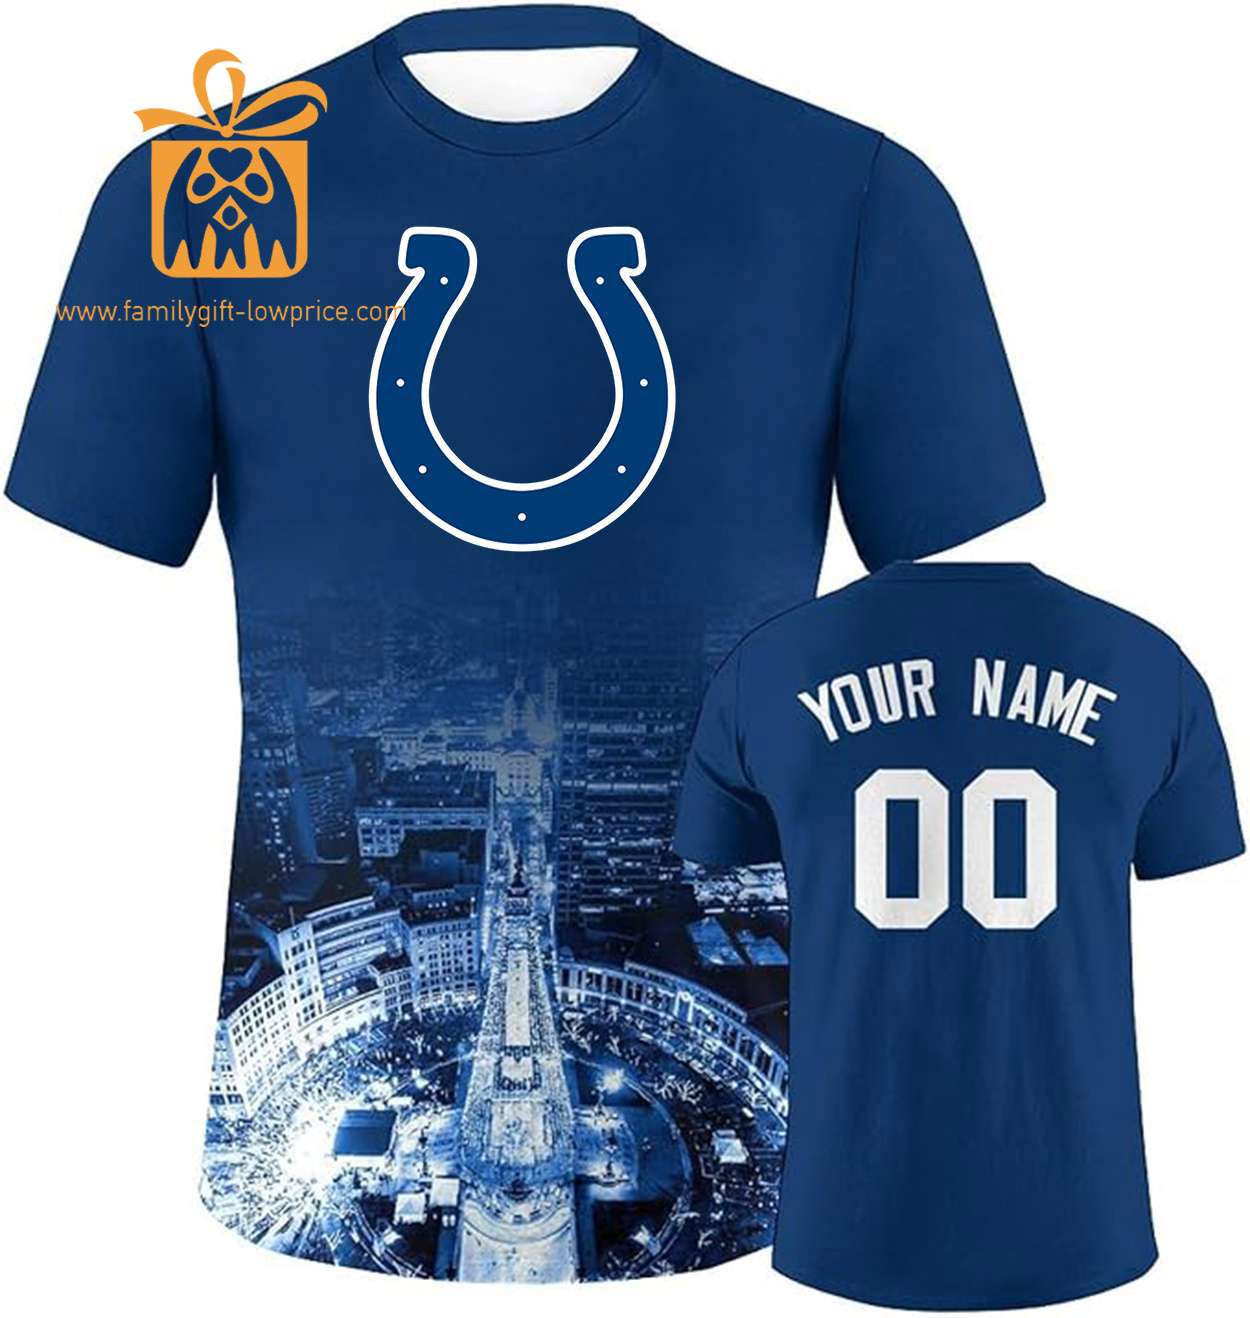 Indianapolis Colts Custom Football Shirts - Personalized Name & Number, Ideal for Fans